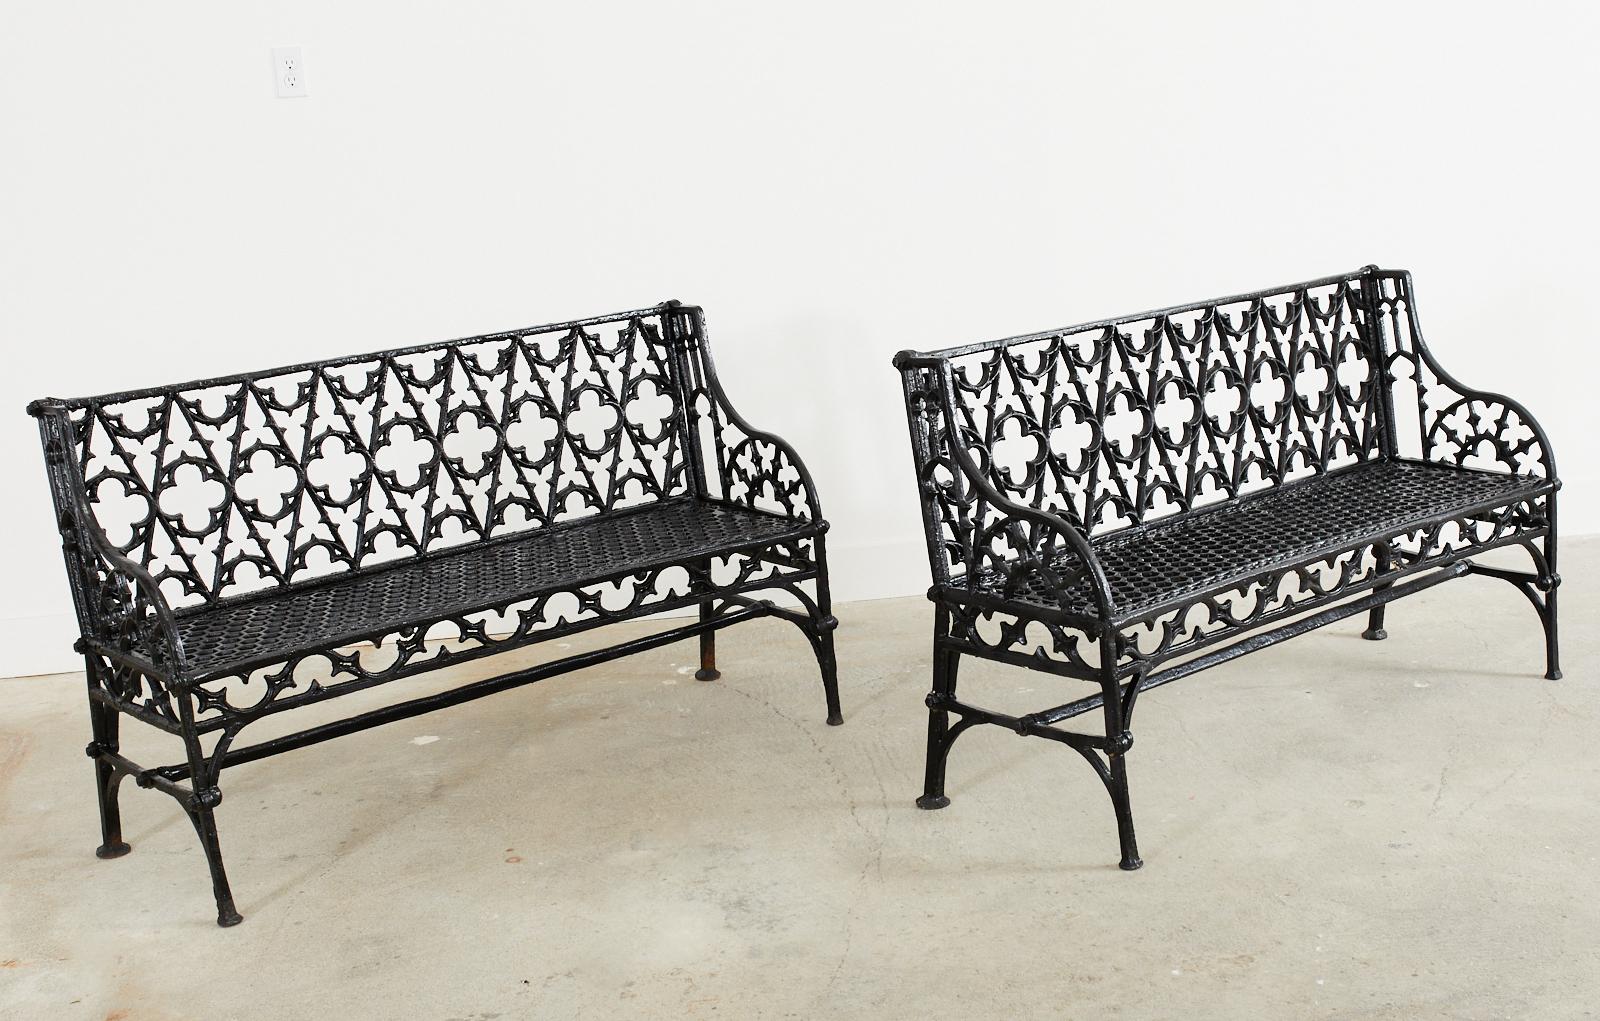 20th Century Pair of English Coalbrookdale Attributed Iron Gothic Revival Garden Benches